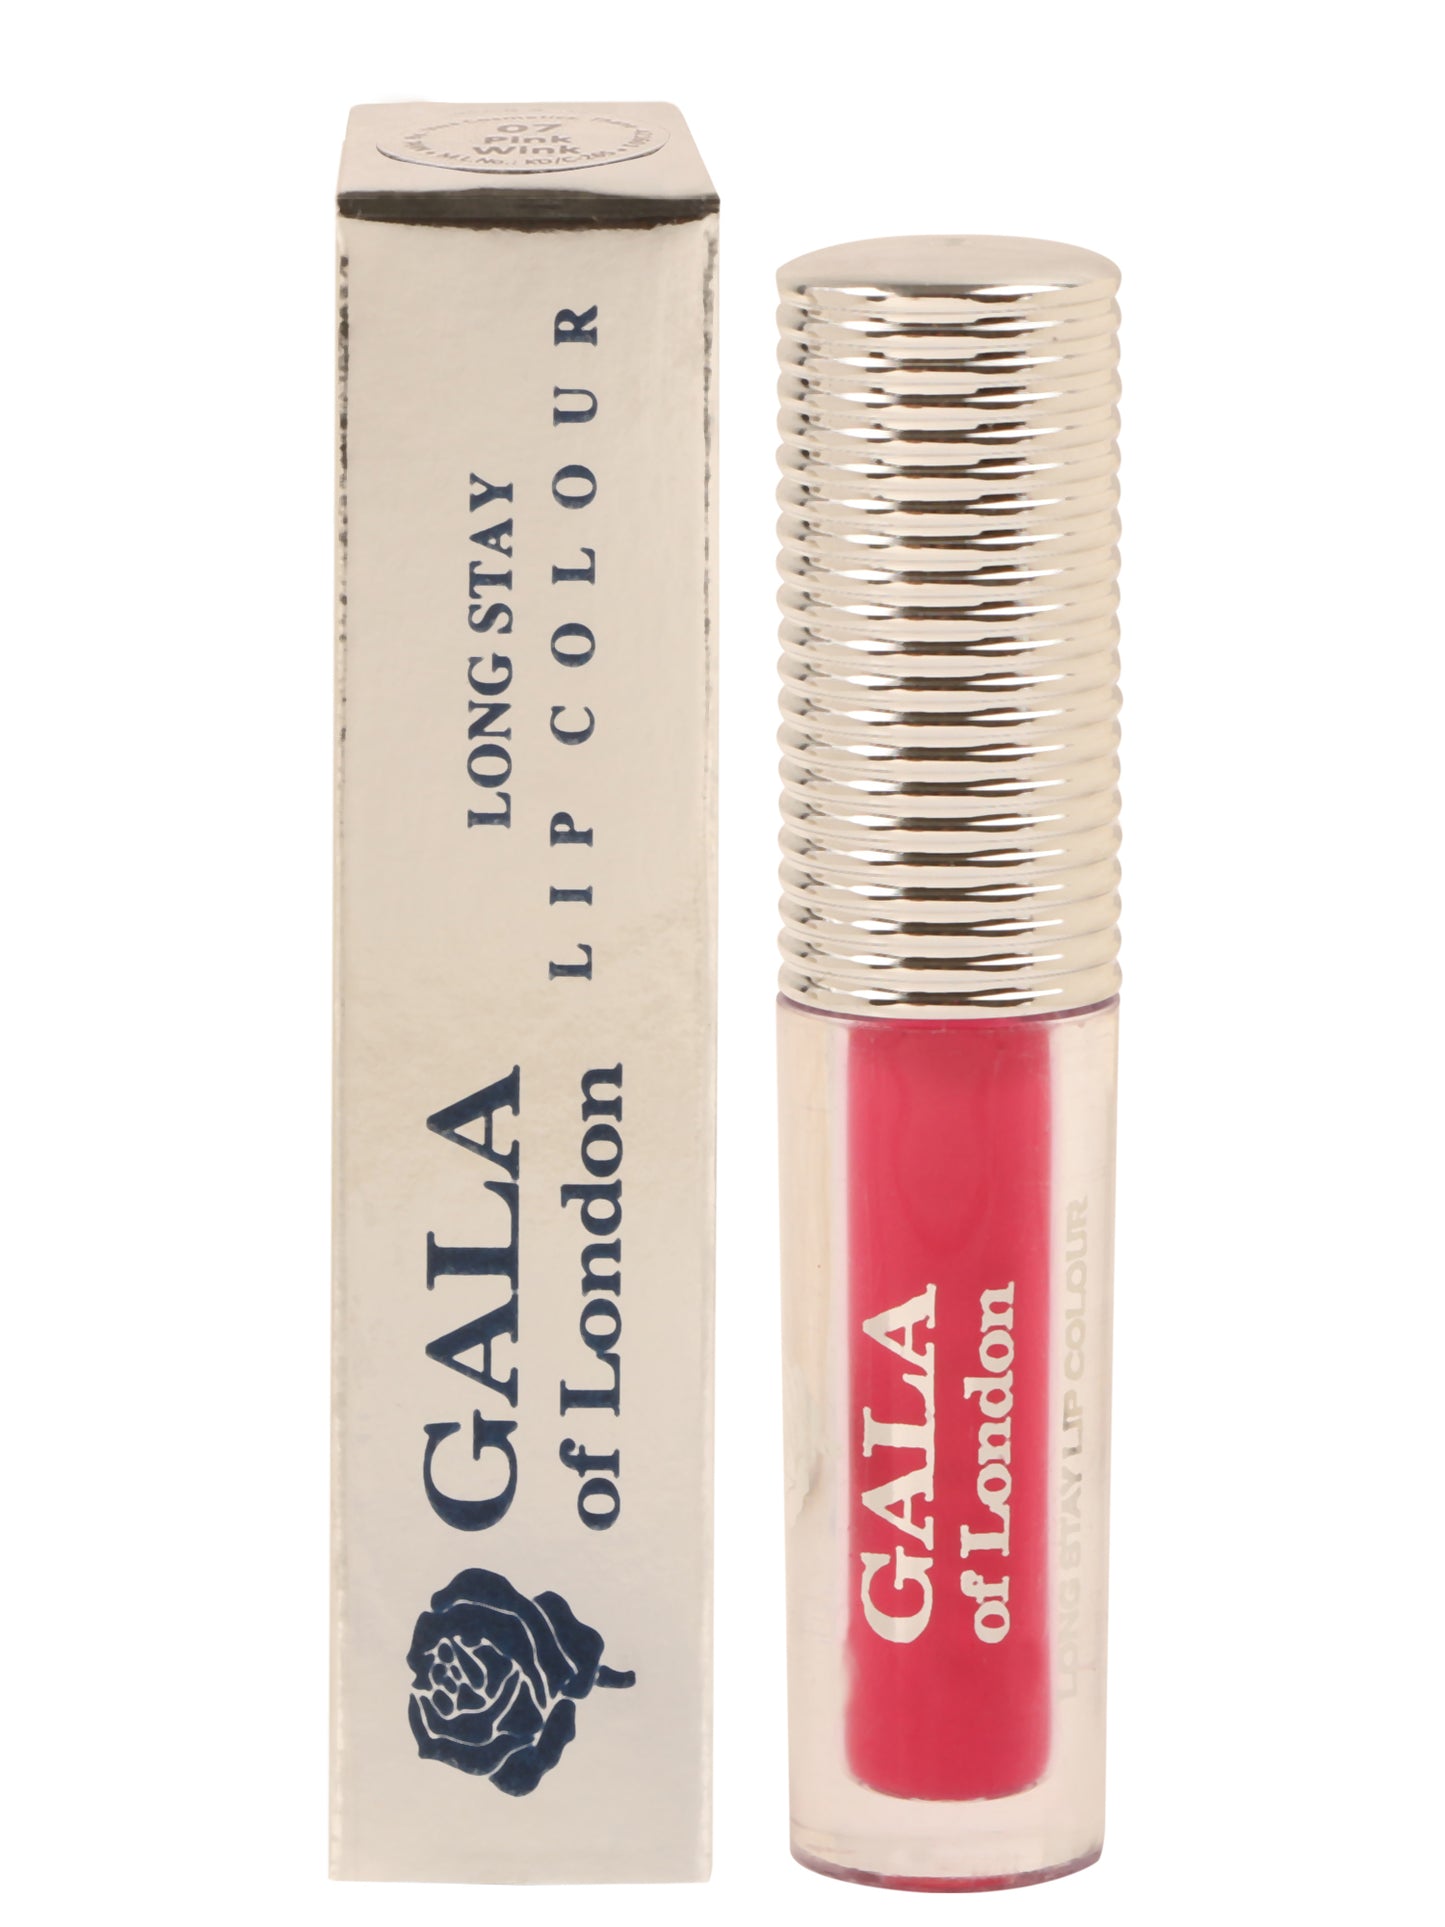 Gala of London SMUDGE PROOF Long Stay Lip Colour - 07 Pink Wink